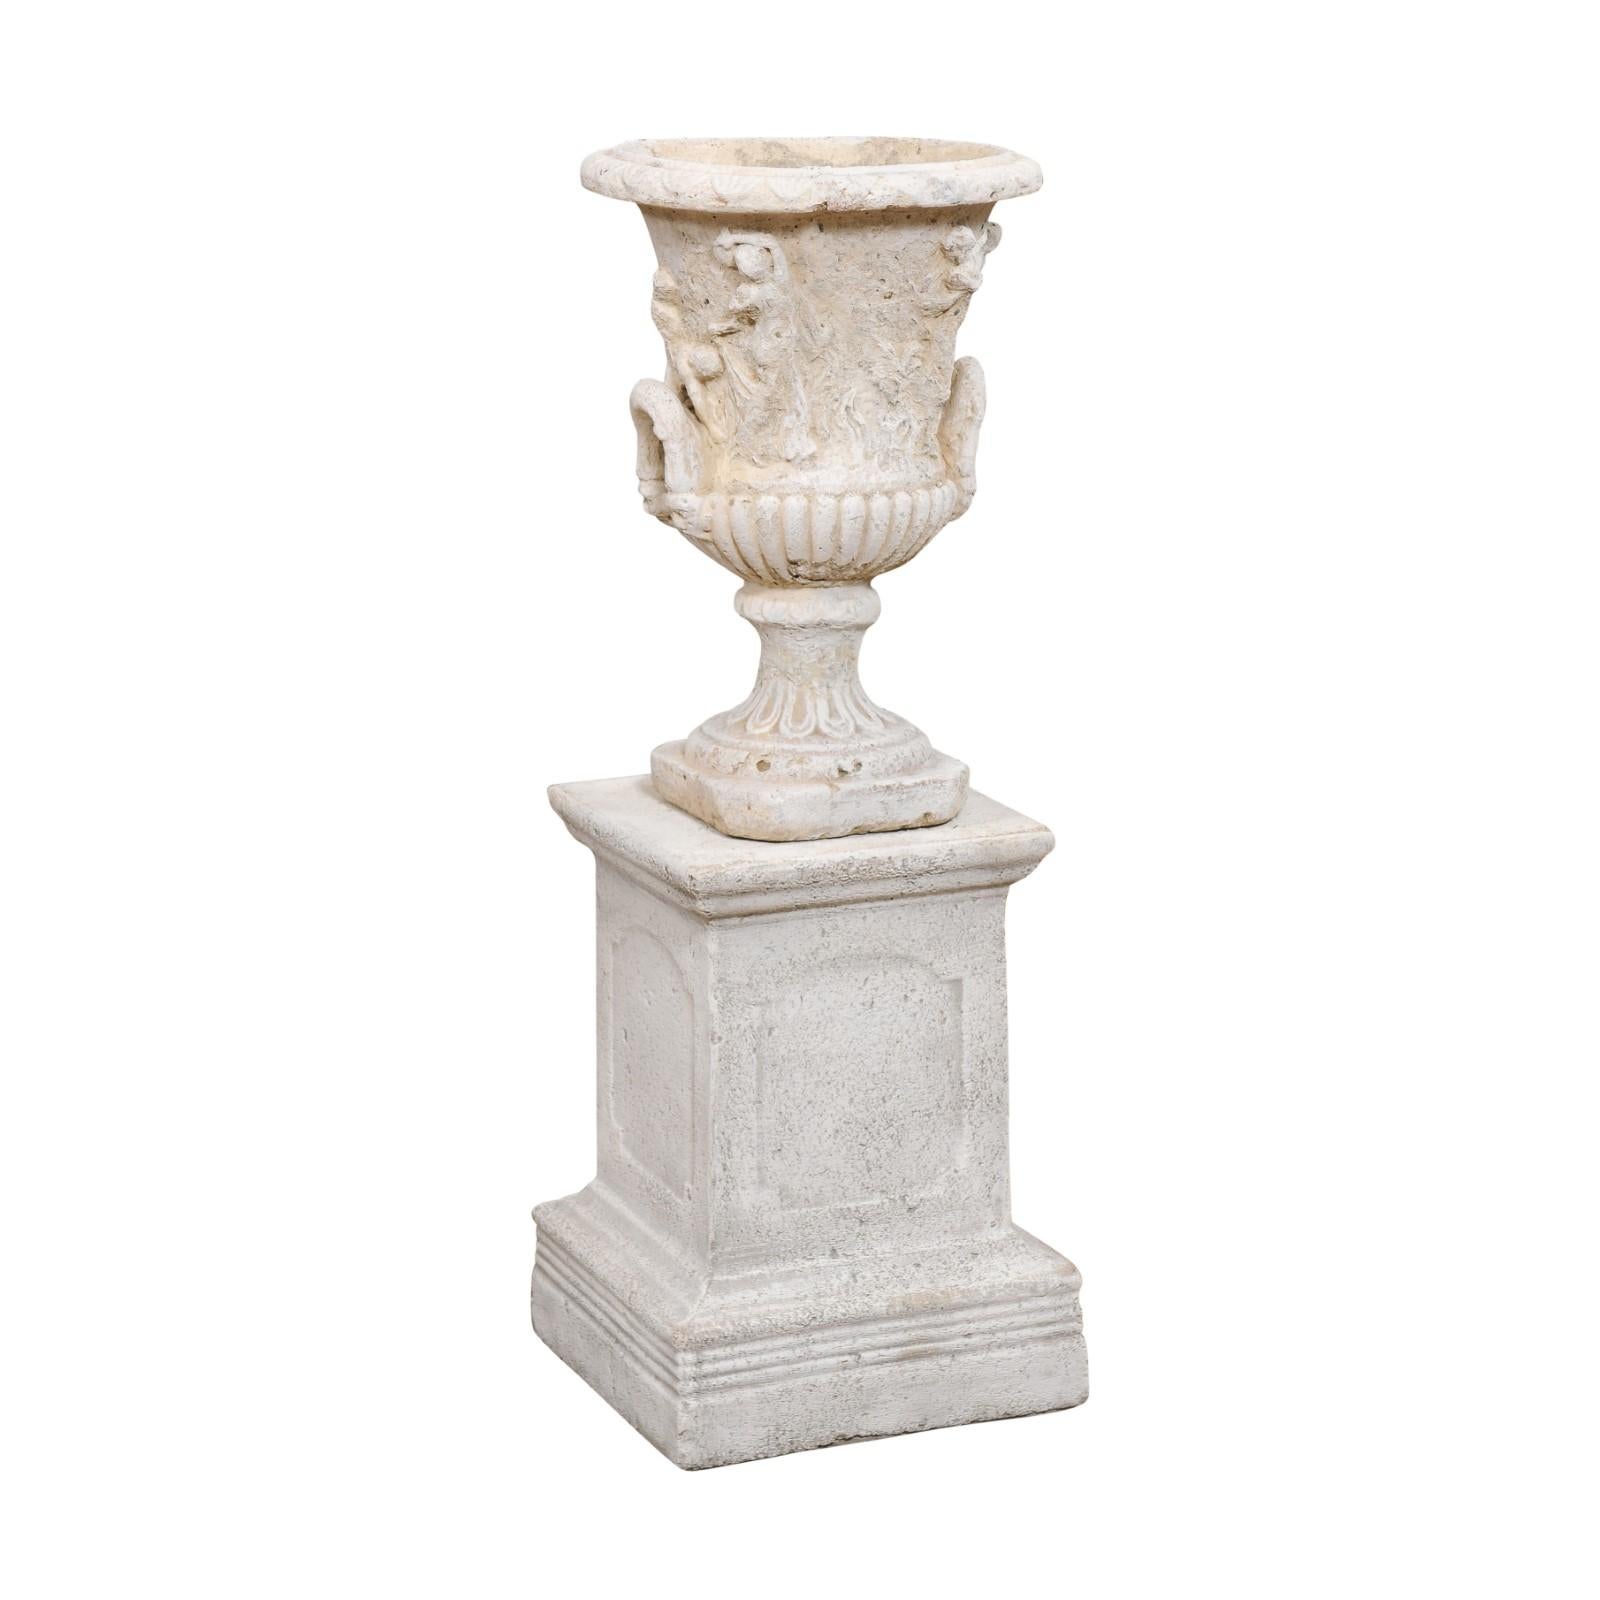 A French stone Provençale jardinière from the second half of the 19th century, with low-relief carved scenes and handles. Born in Provence at the end of the reign of France's last Emperor Napoleon III, this jardinière reflects its influence of the